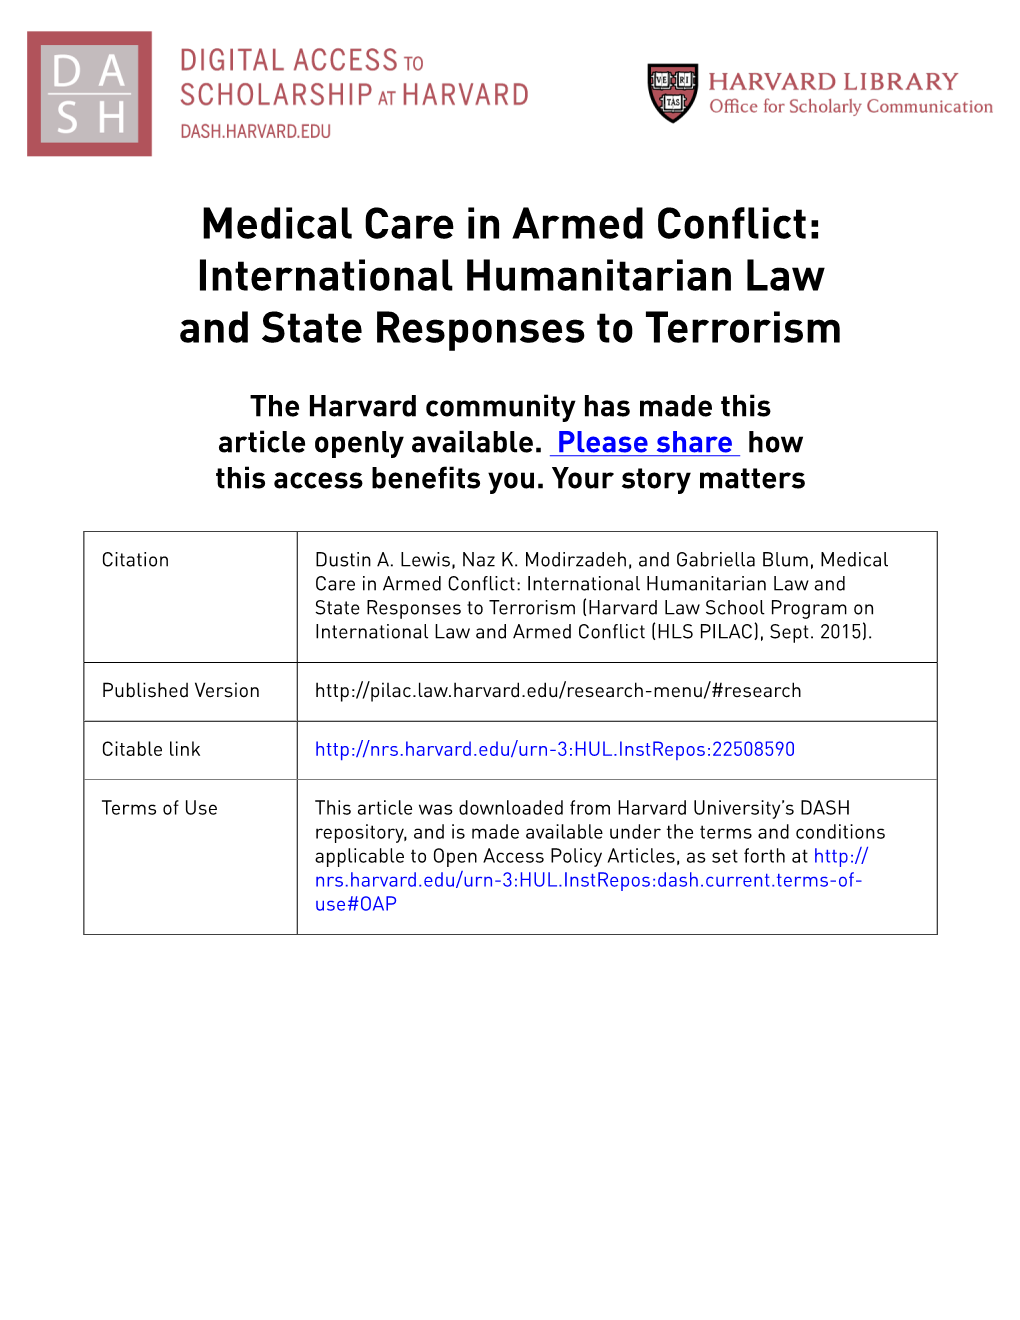 Medical Care in Armed Conflict: International Humanitarian Law and State Responses to Terrorism